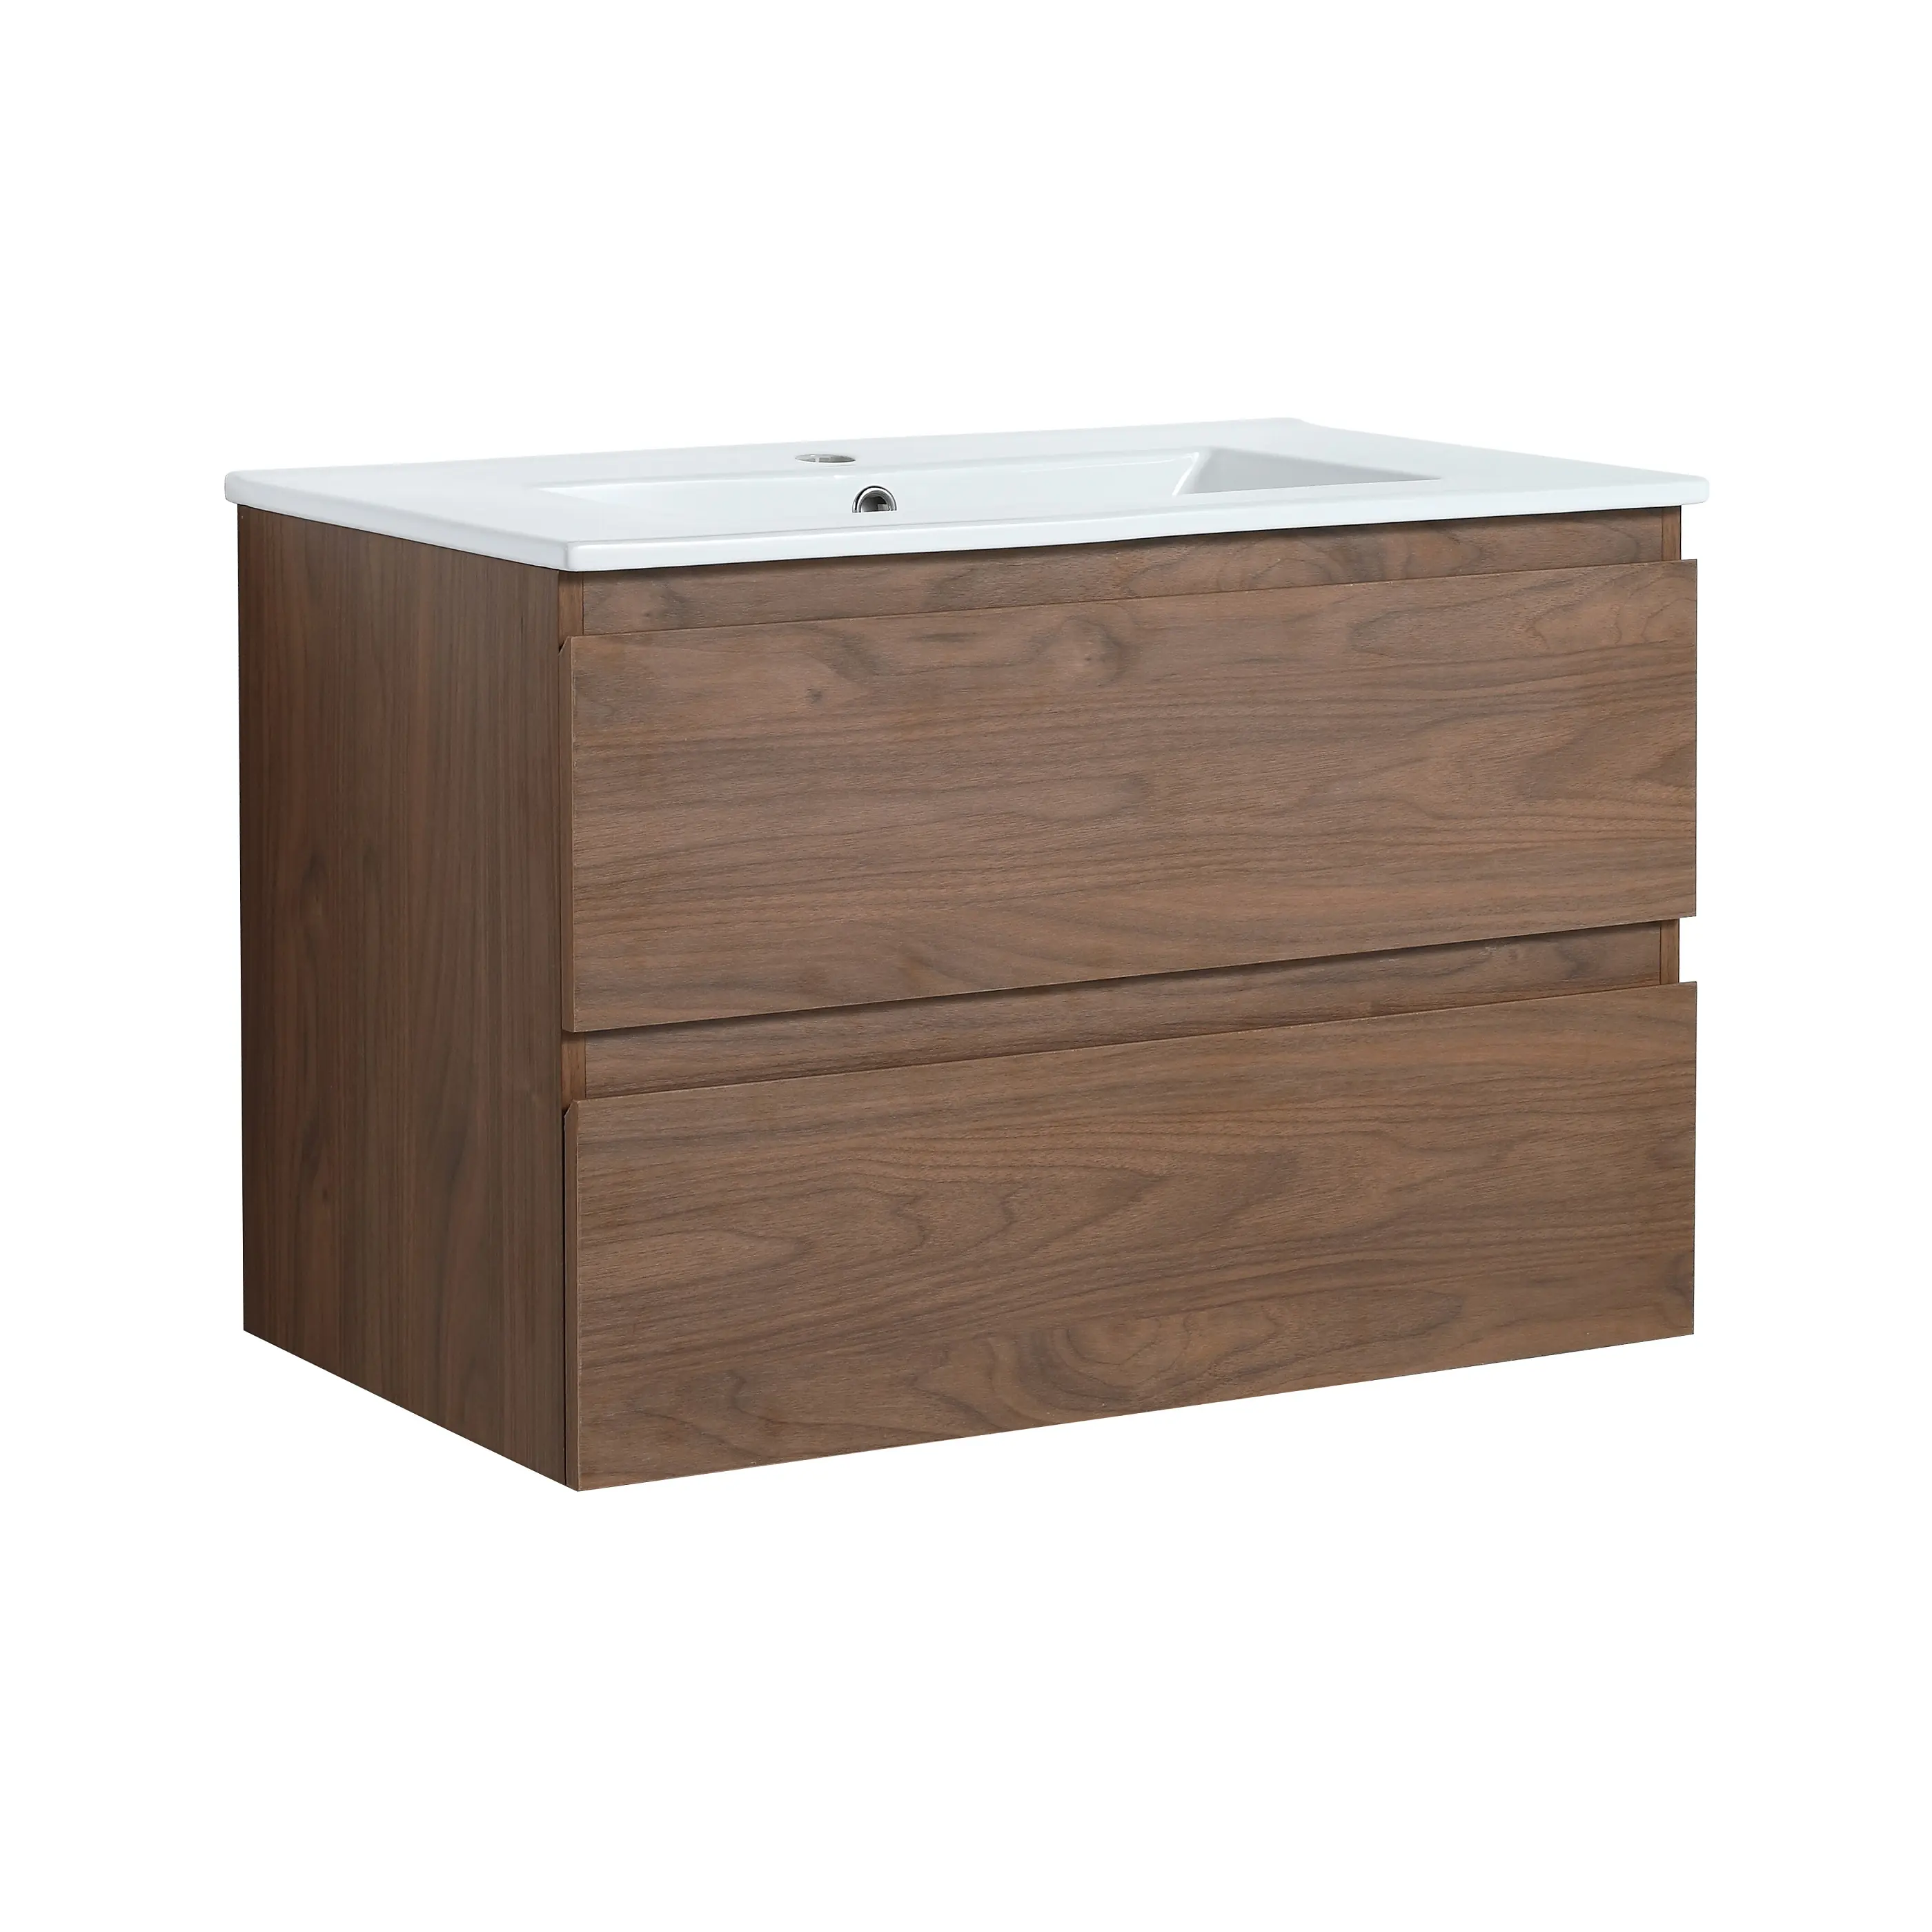 Small Space Bathroom Vanity Wall Mounted Sink Unit